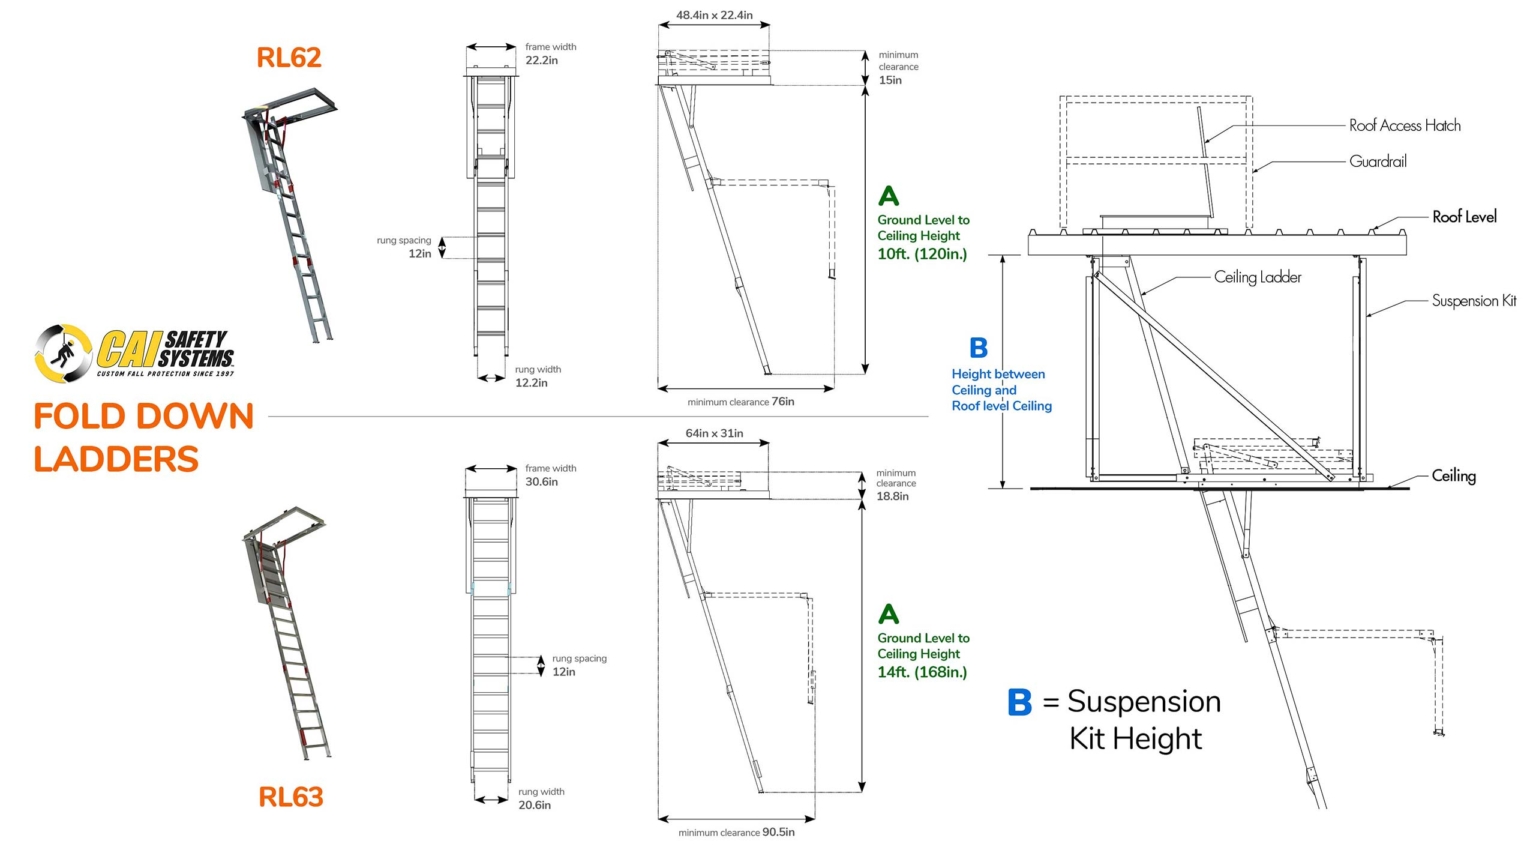 Fold Down Ladders - Reference Comparison